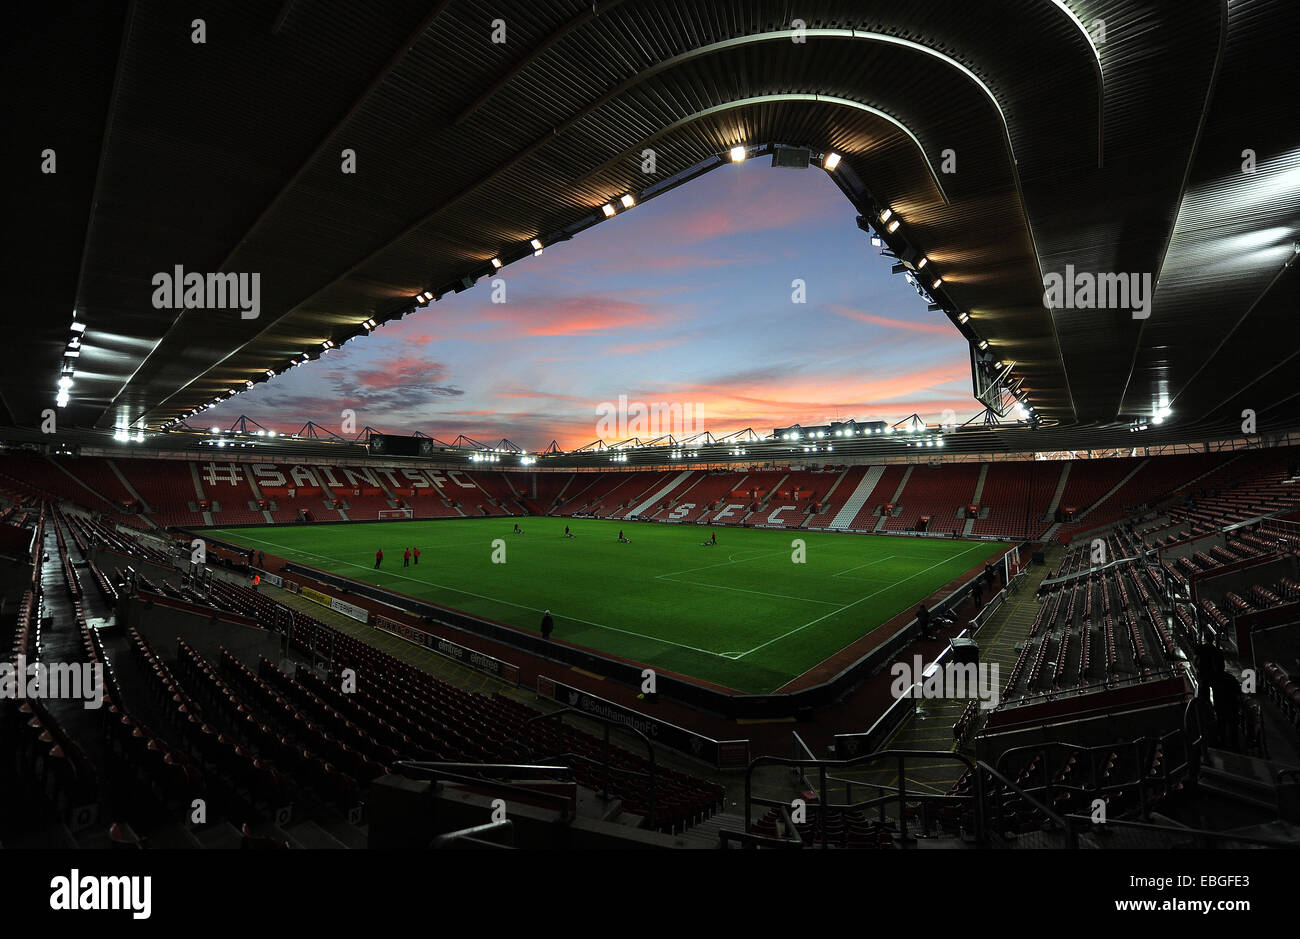 Southampton, UK. 30th Nov, 2014. A general view of St Mary's Stadium home of Southampton FC during a winter sunset.- Barclays Premier League - Southampton vs Manchester City - St Mary's Stadium - Southampton - England - 30th November 2014 © csm/Alamy Live News Stock Photo